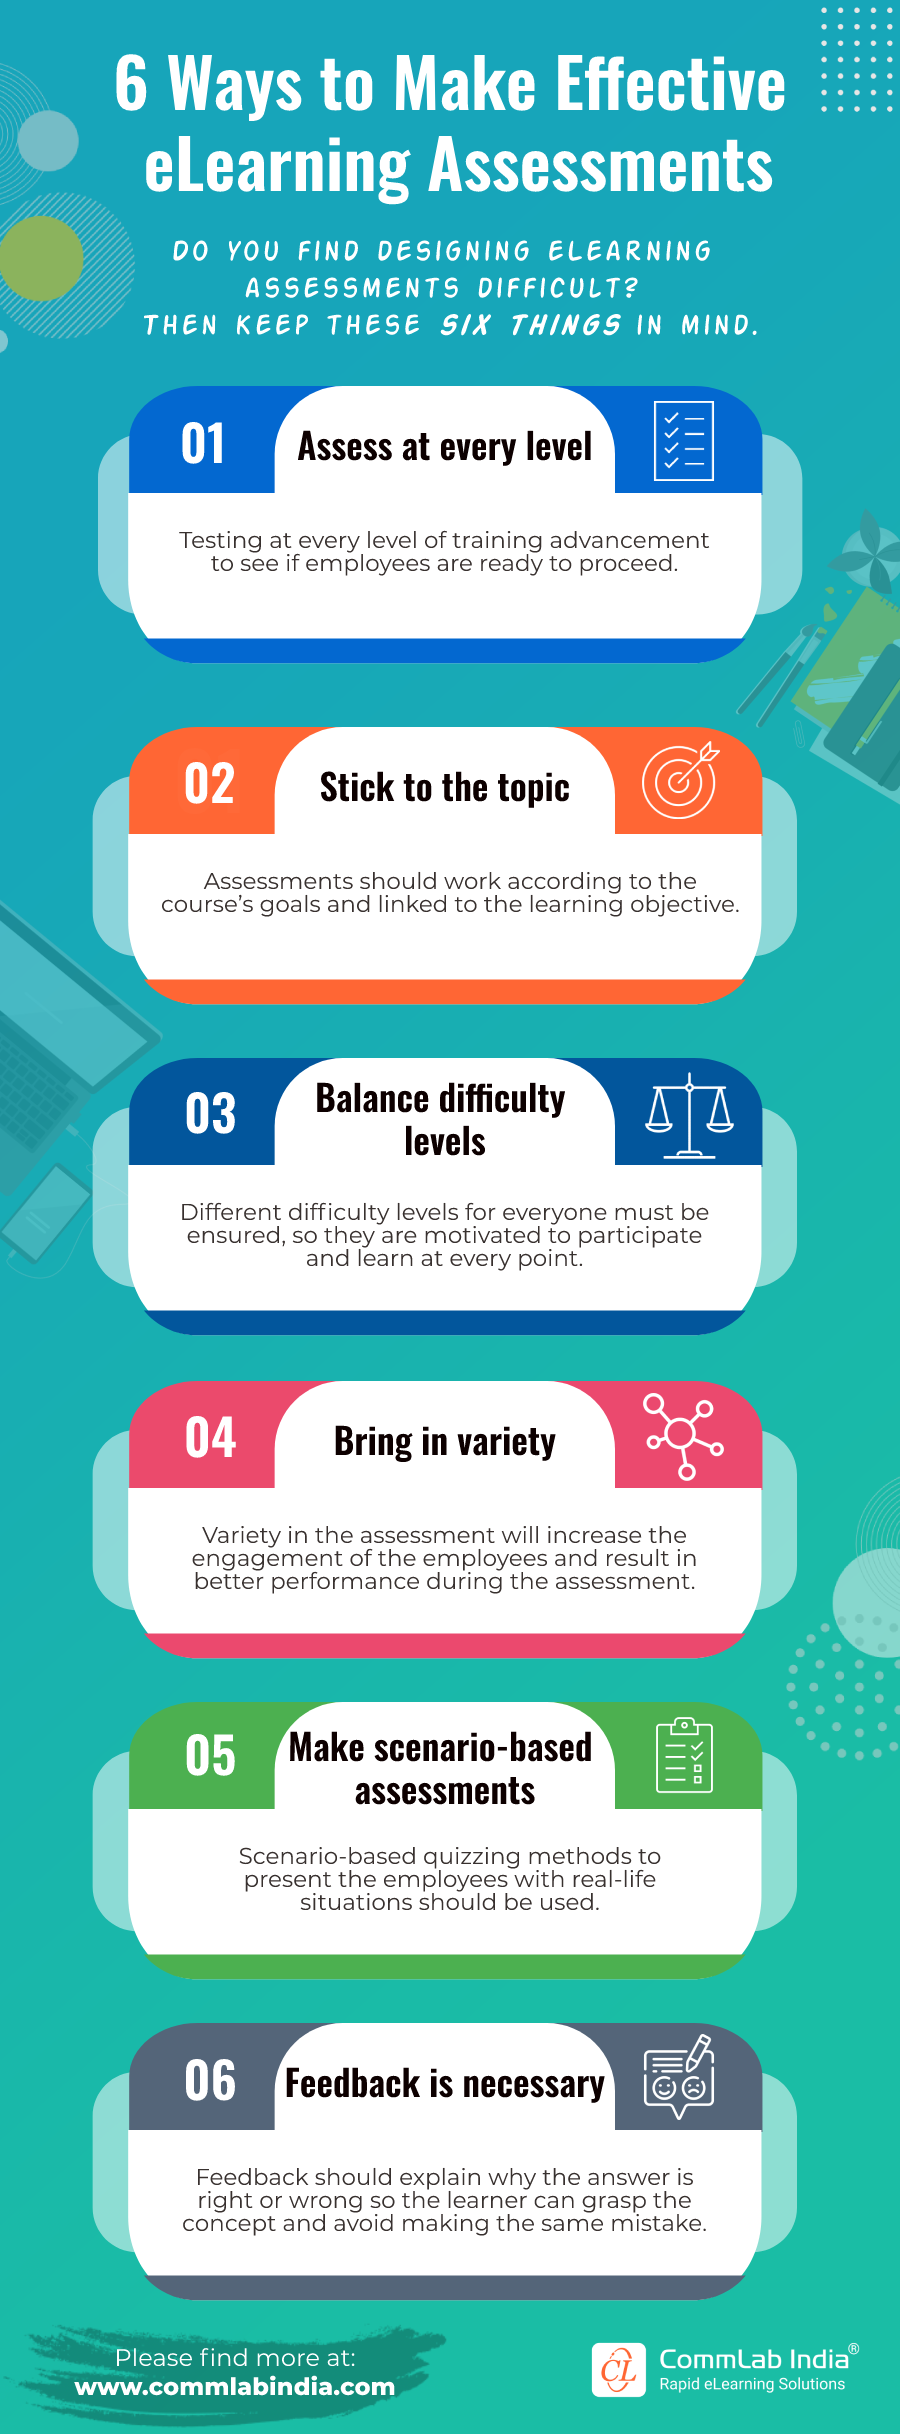 Ways to Make Effective eLearning Assessments